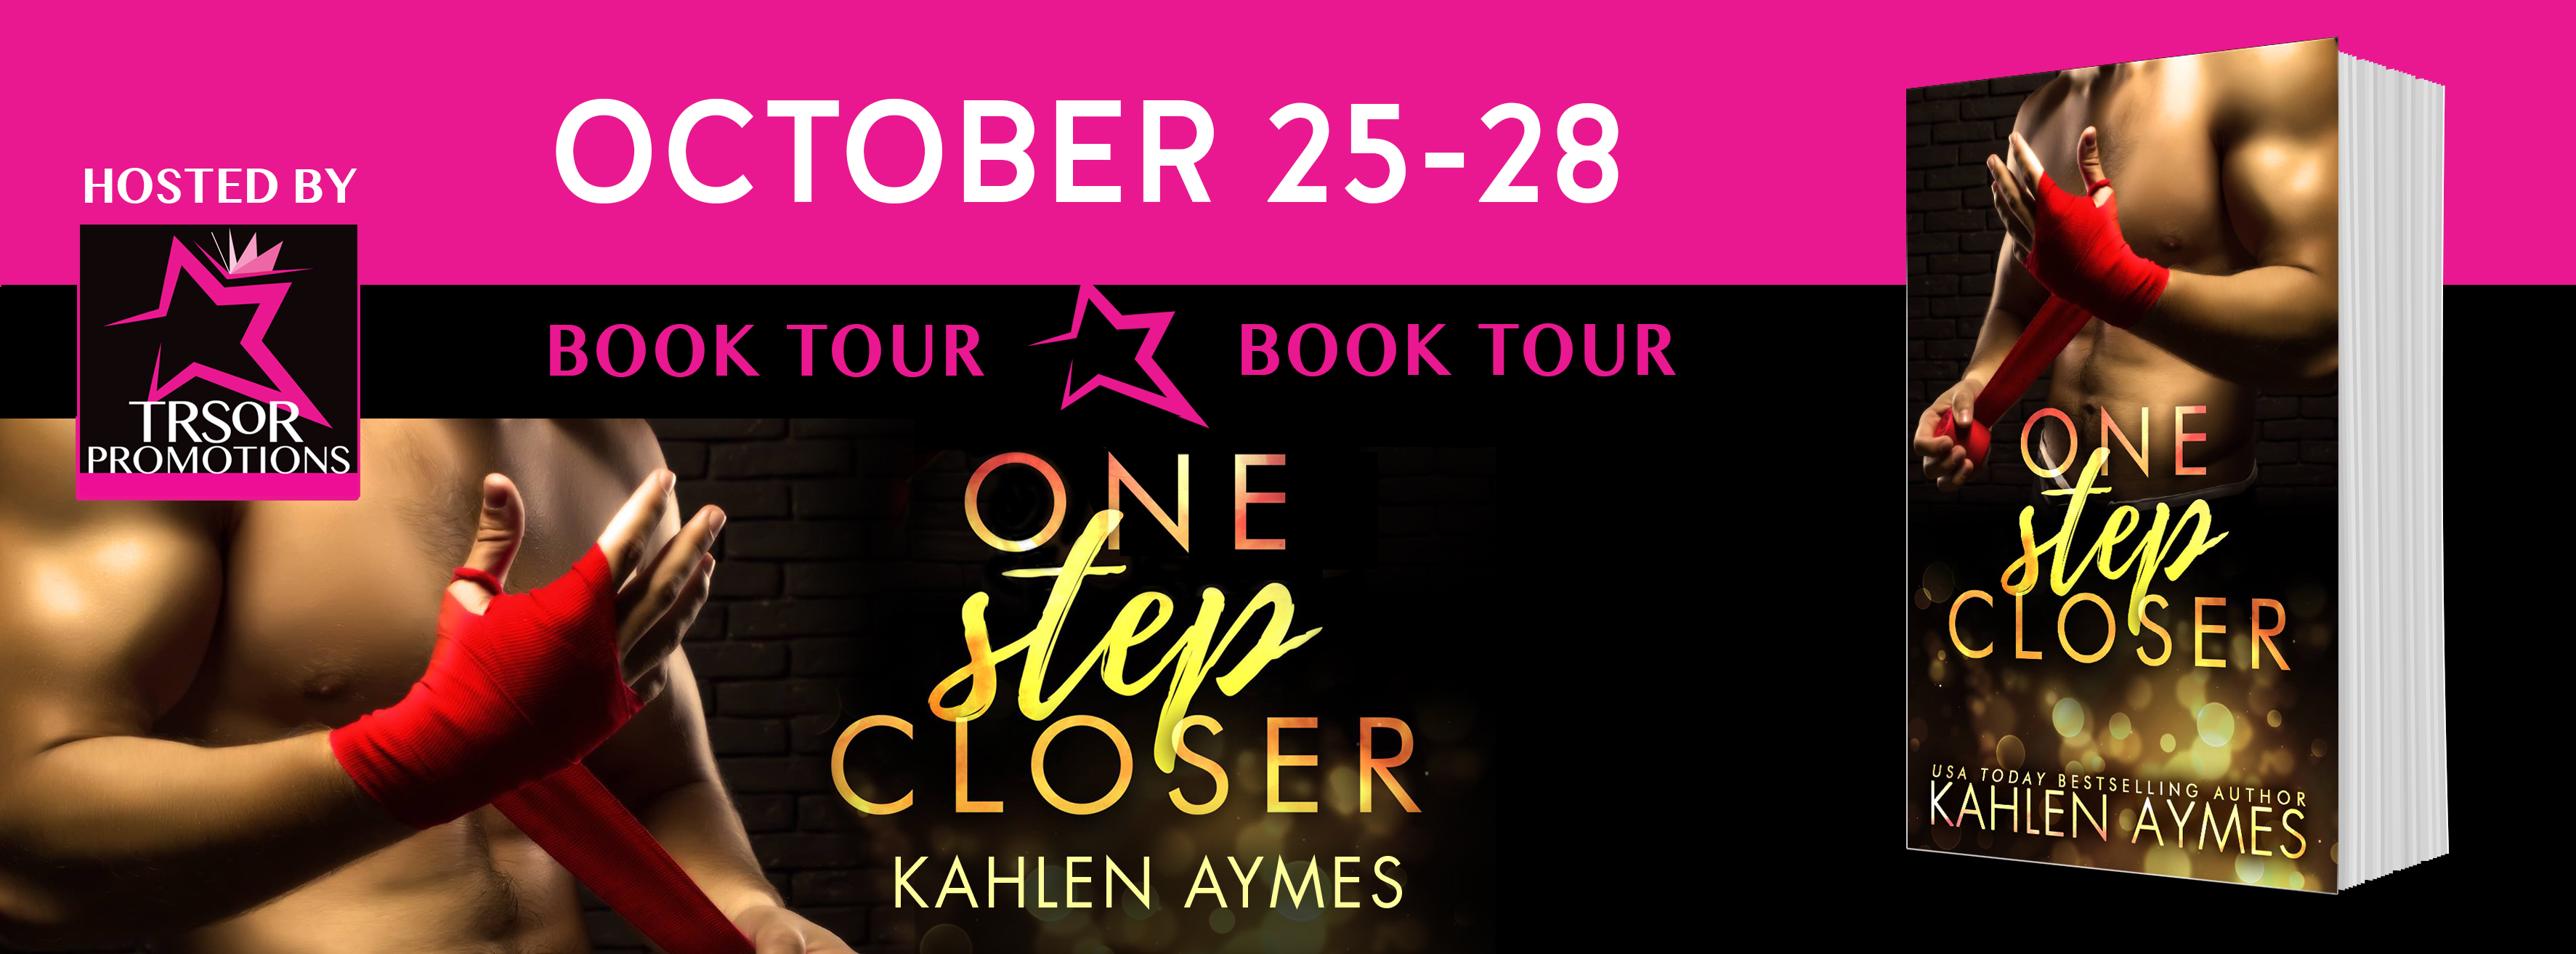 One Step Closer by Kahlen Aymes Blog Tour #Review